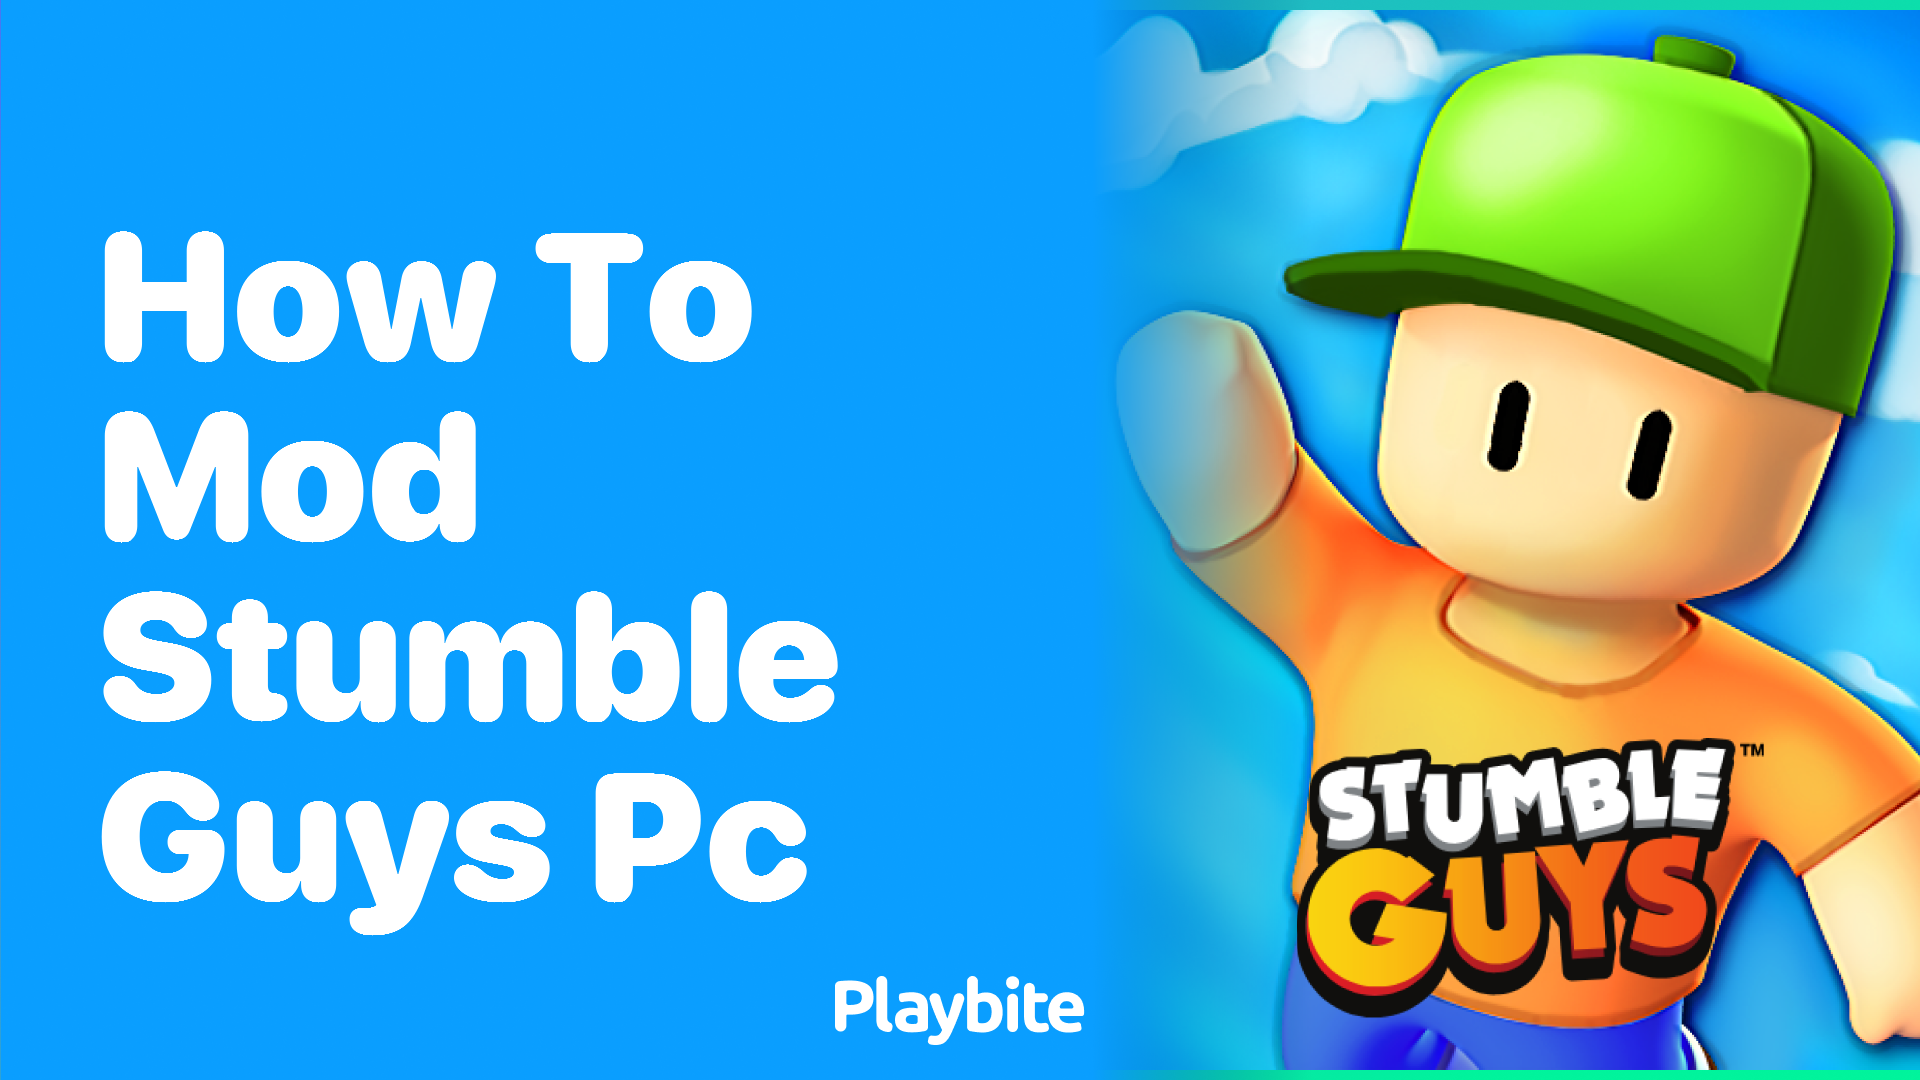 How to Mod Stumble Guys on PC: A Simple Guide